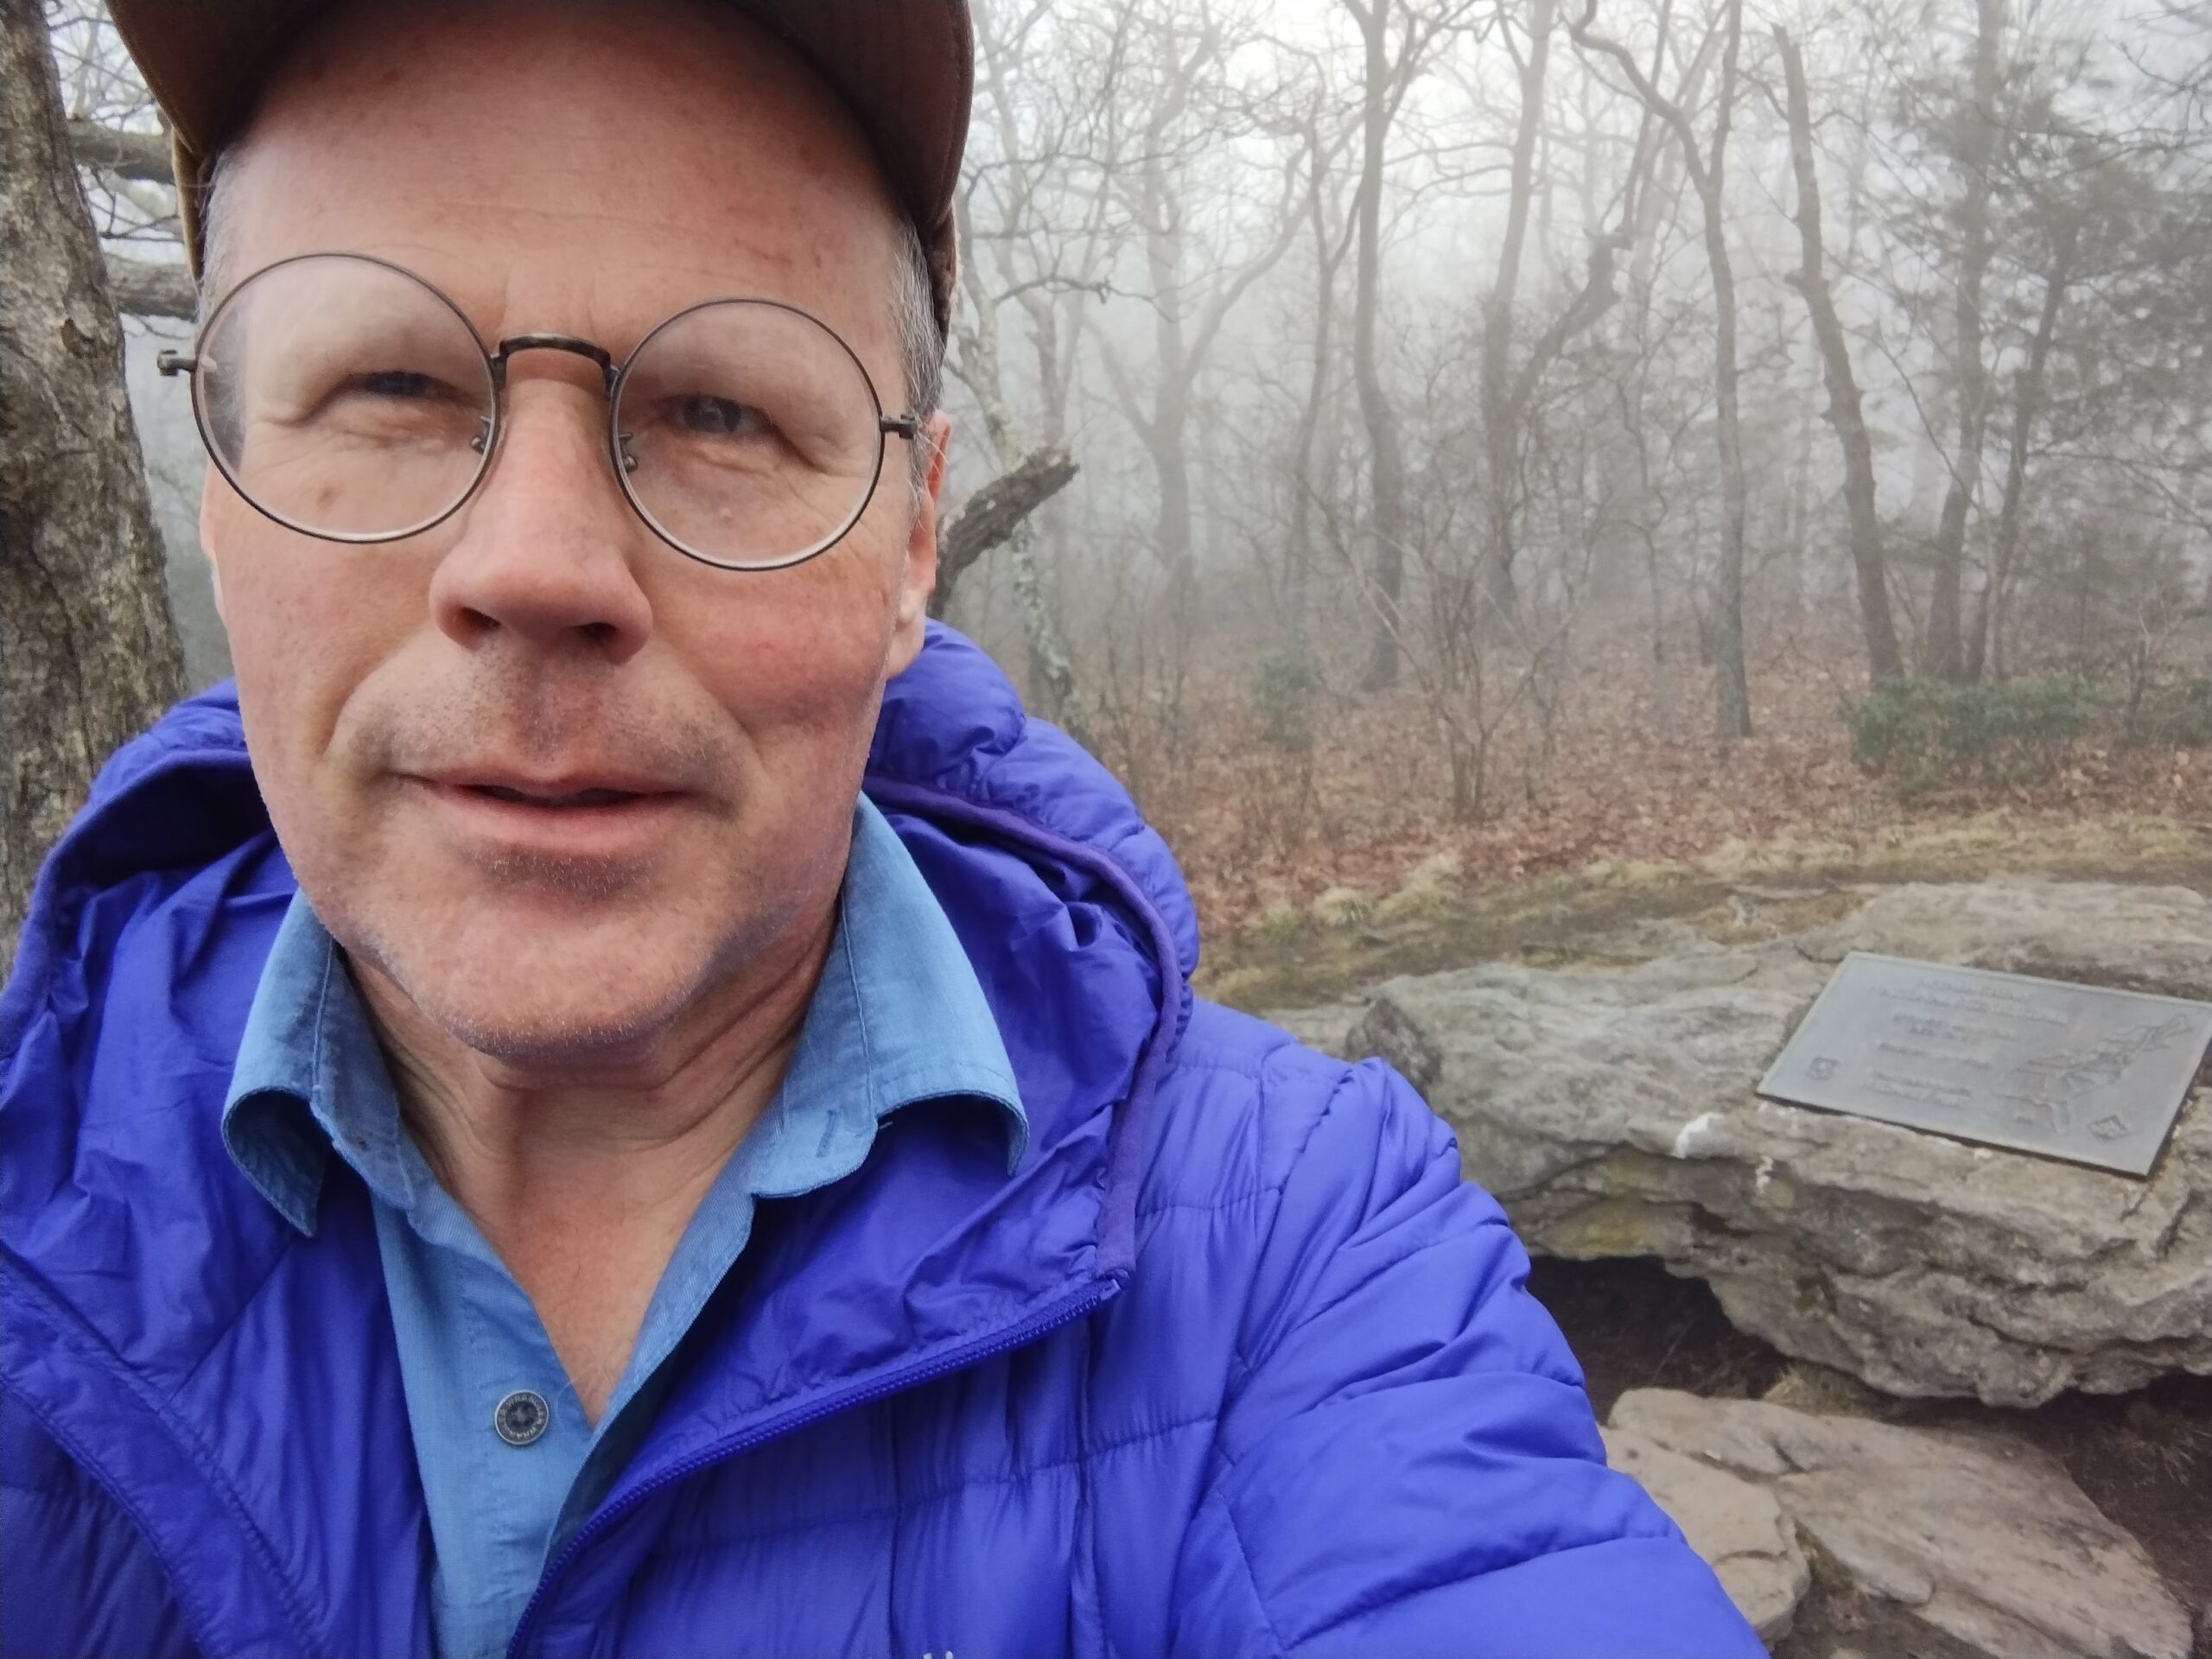 Steve is a white, older man standing in a foggy forest while on his hike.